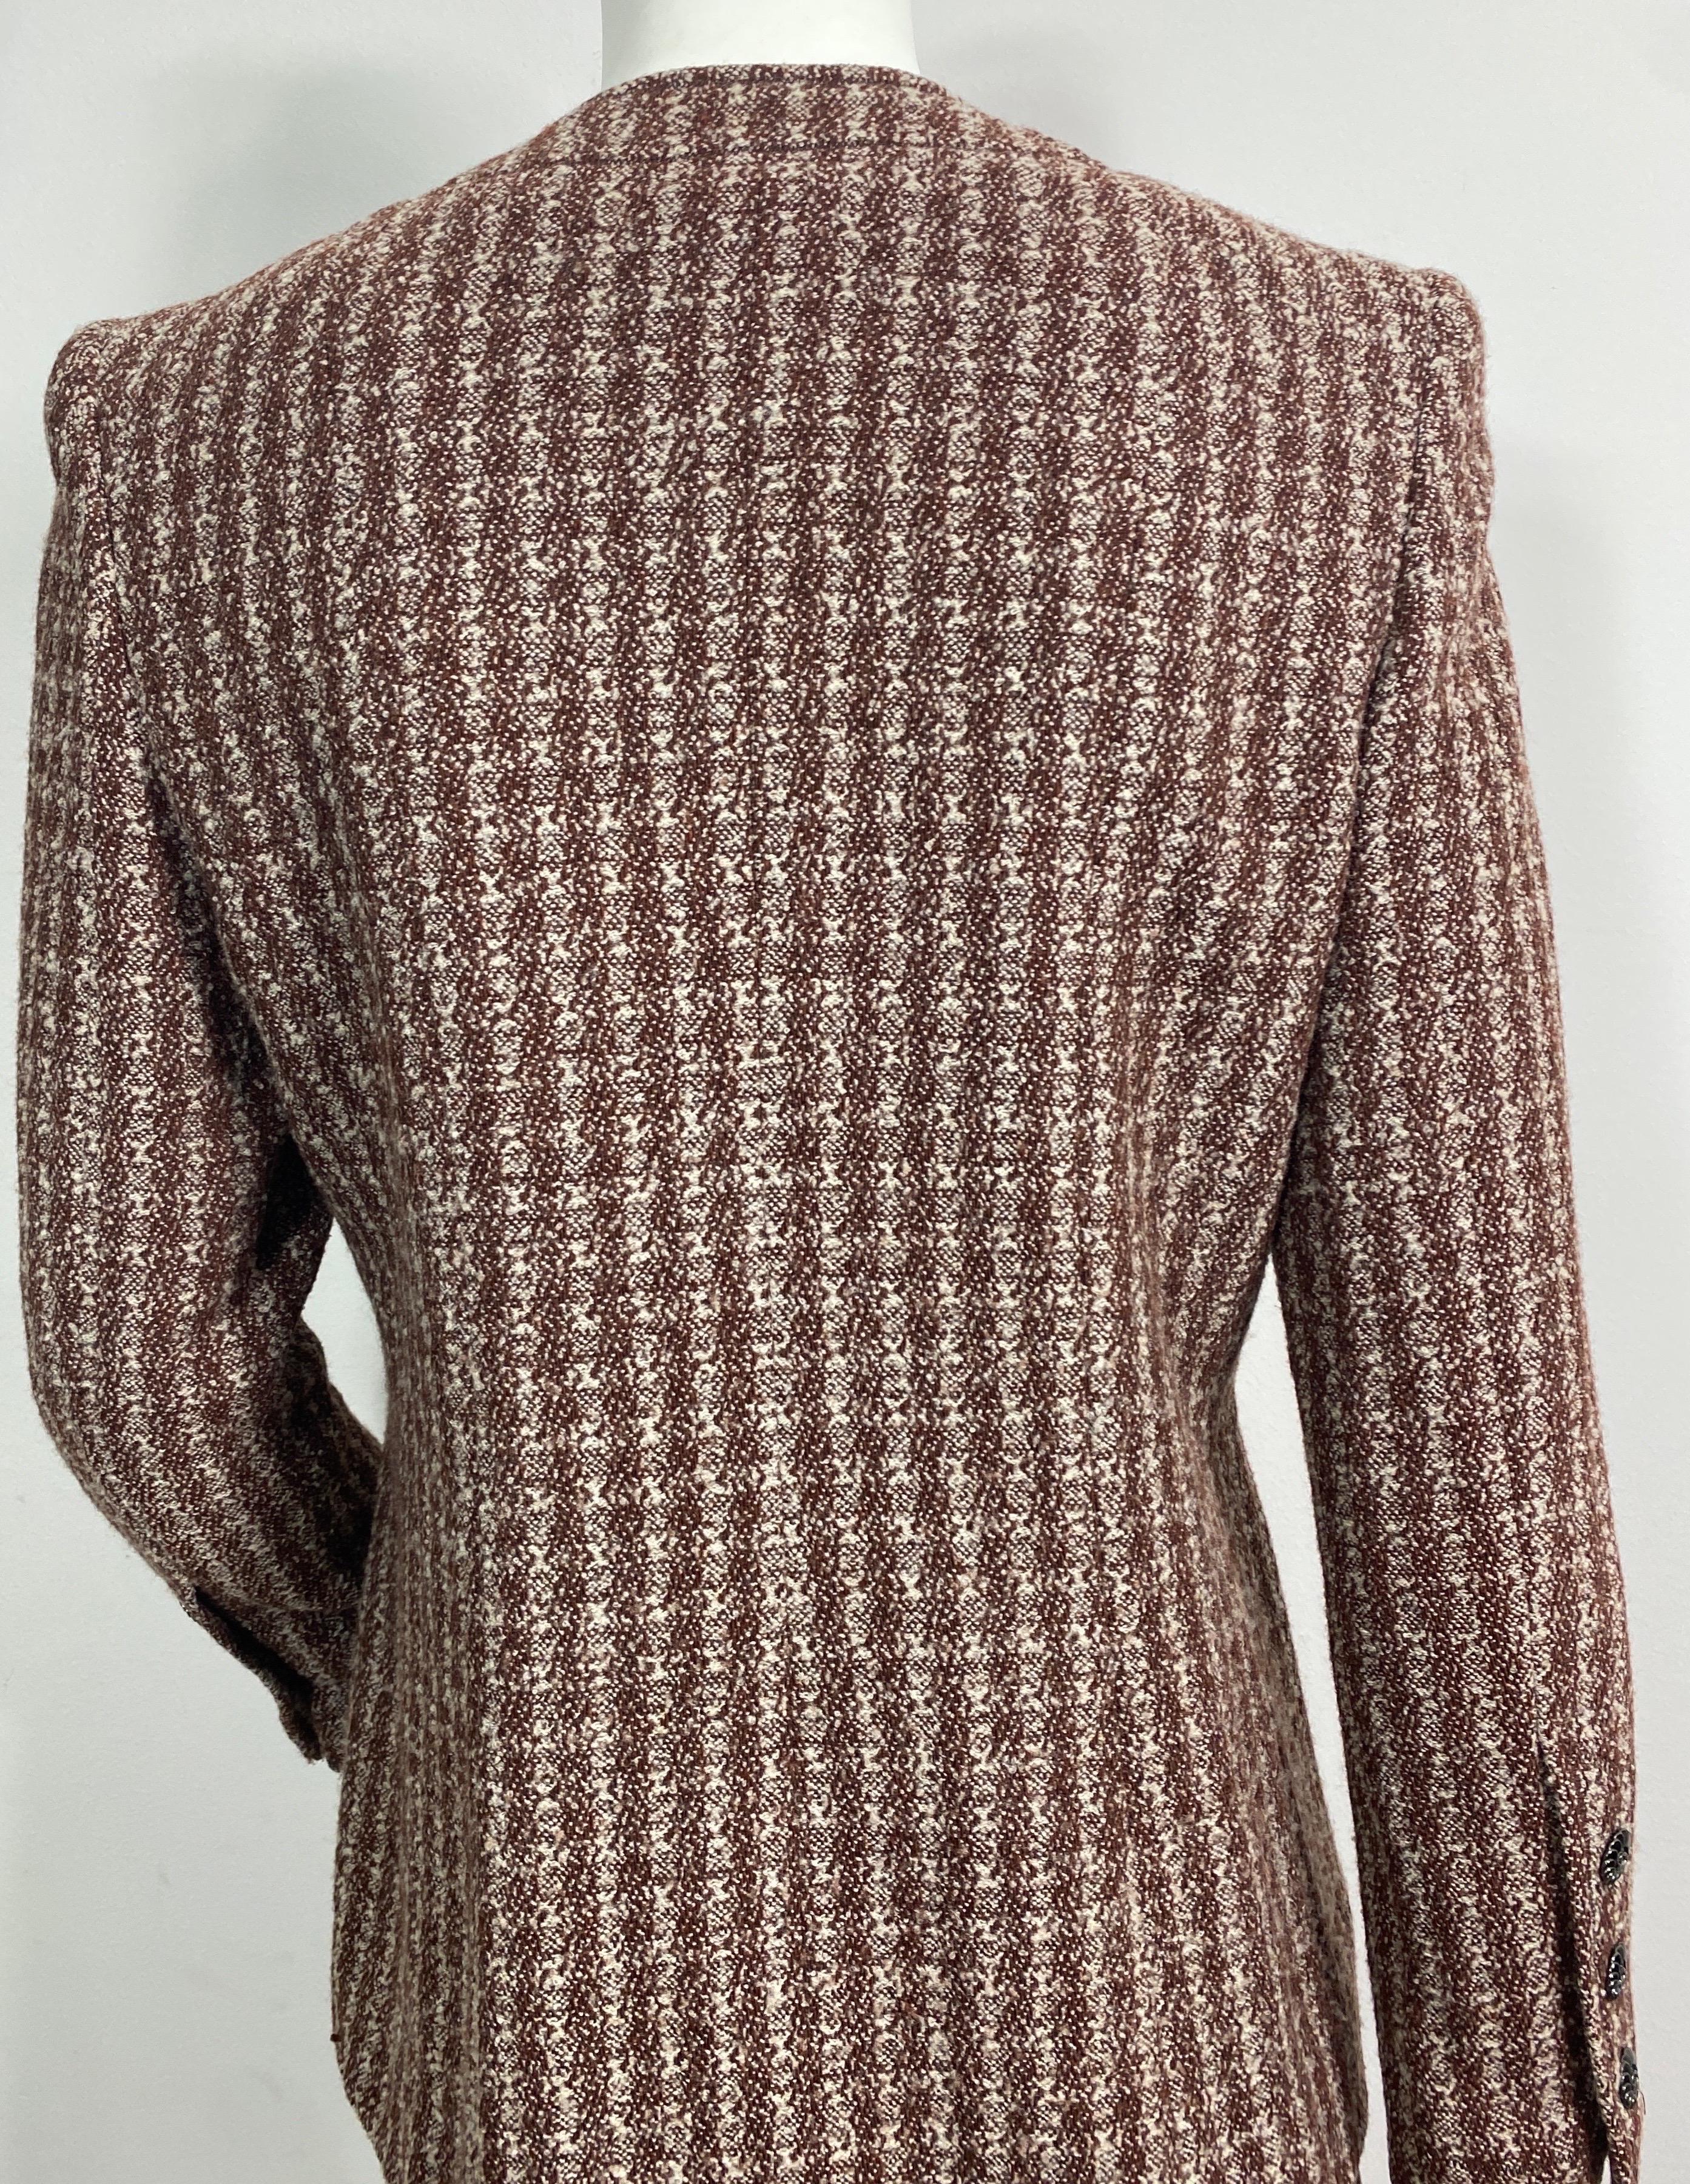 Chanel 1990’s Brown and Crème Wool Nailshead Tweed Skirt Suit-size 36 For Sale 9